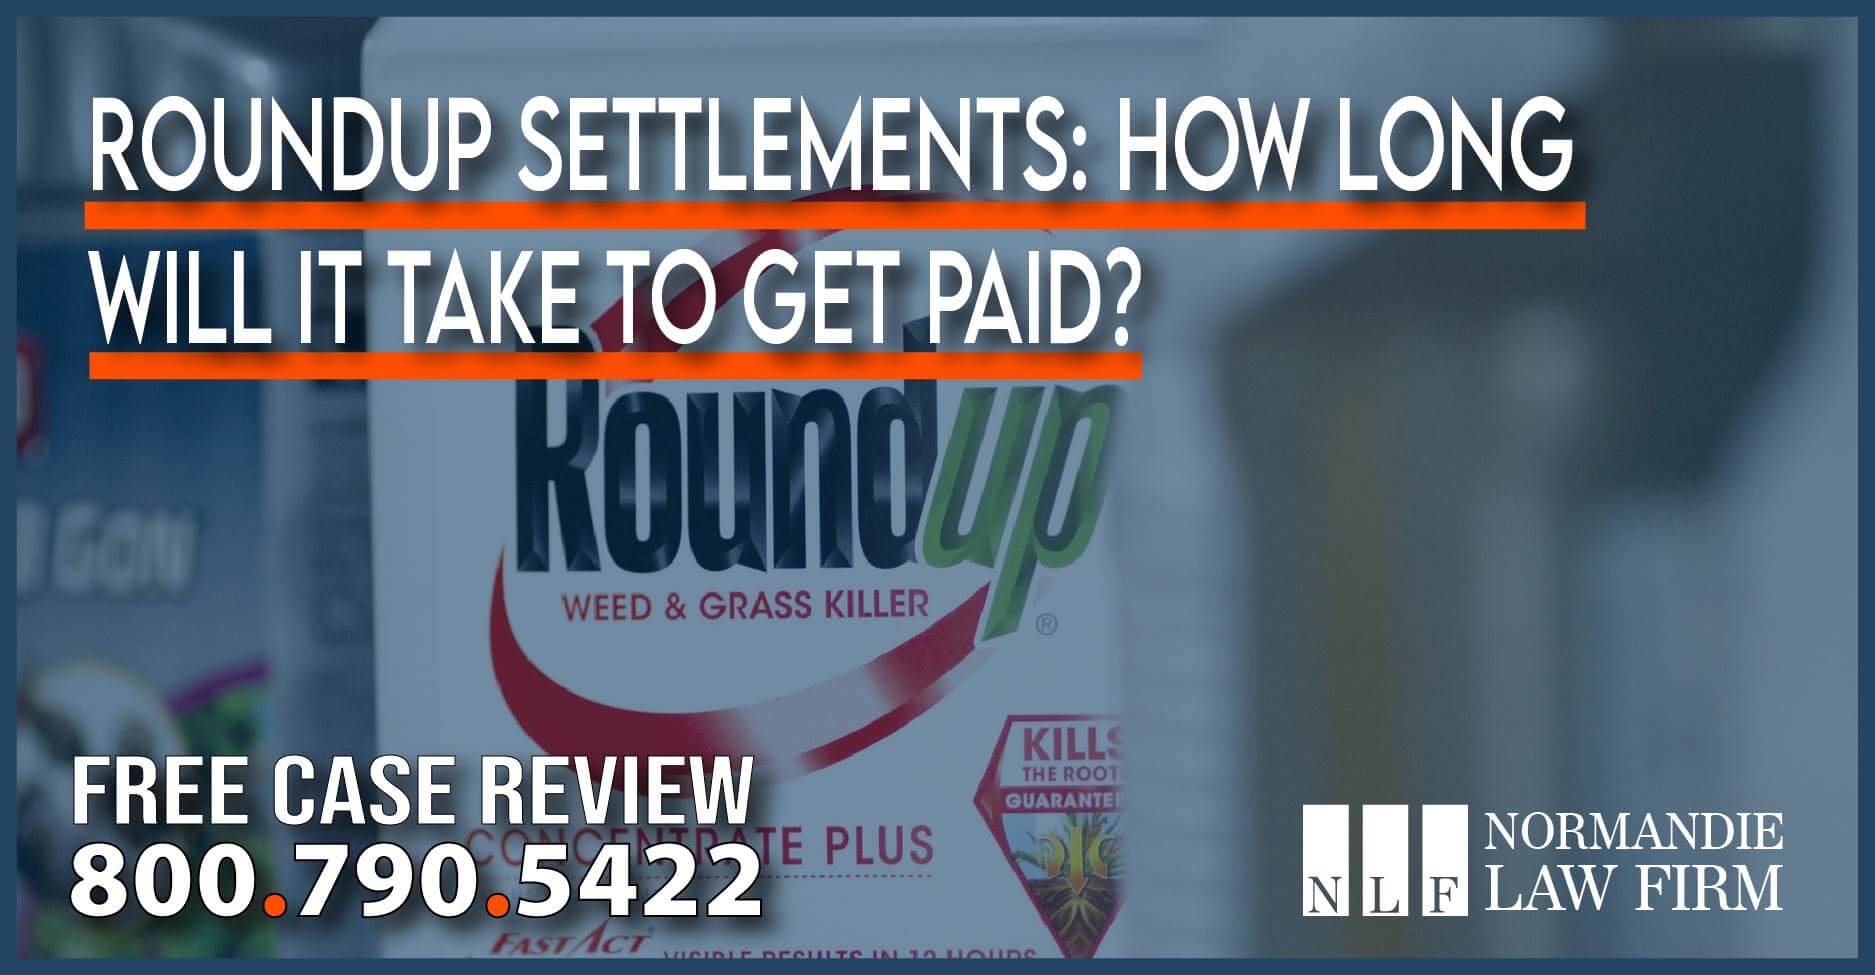 Roundup Settlements How long will it take to get paid?